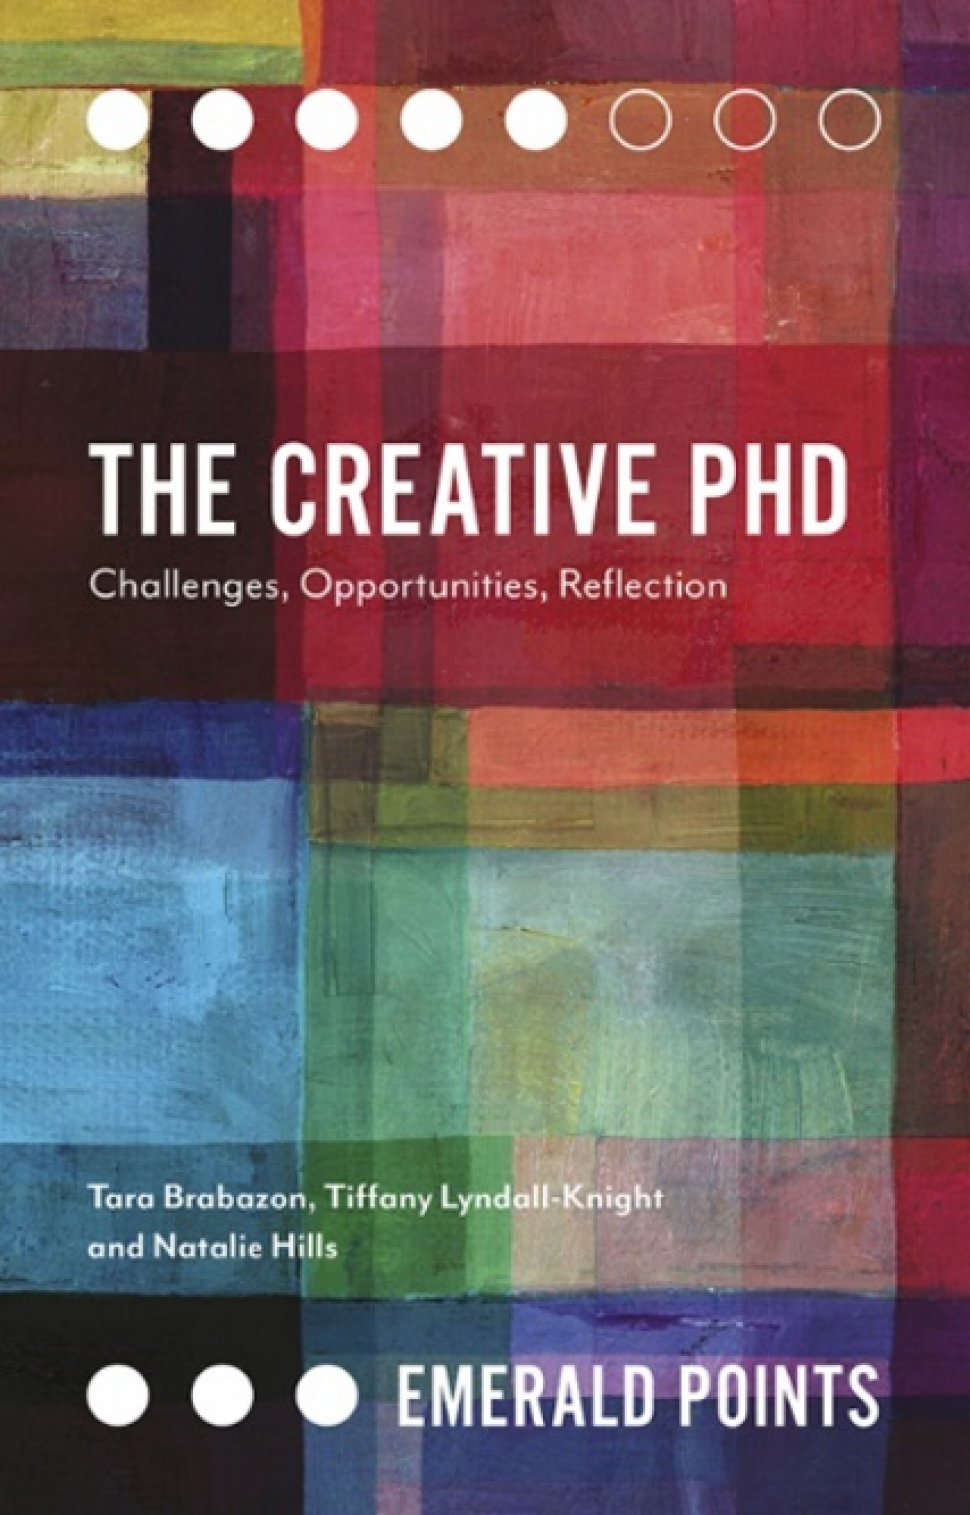 creative-phd-book-launch.png